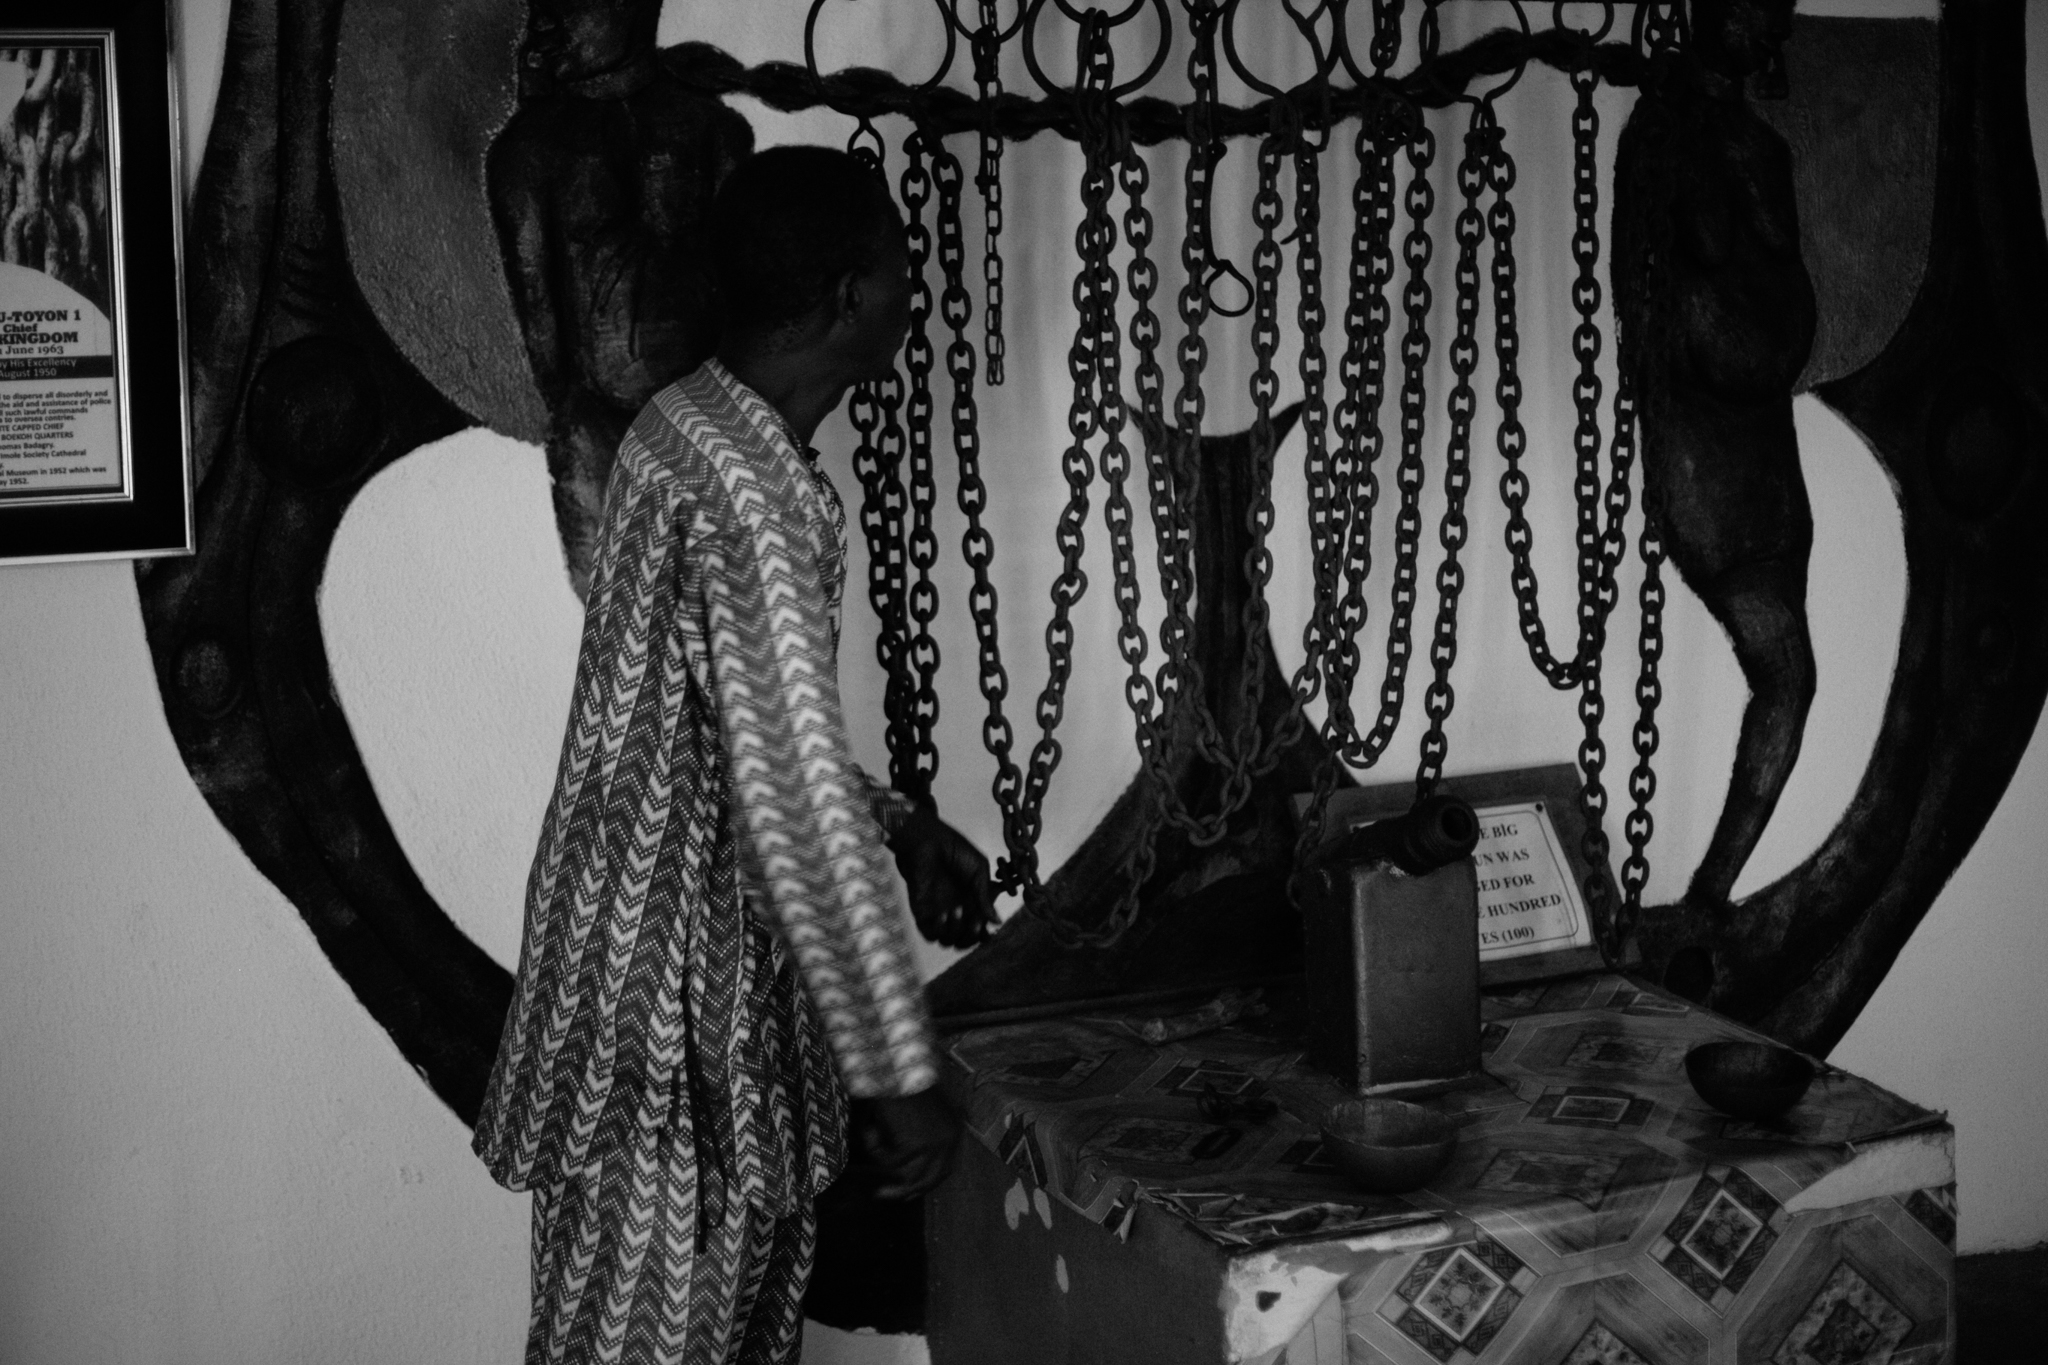 Chains, Badagry Slave Museum